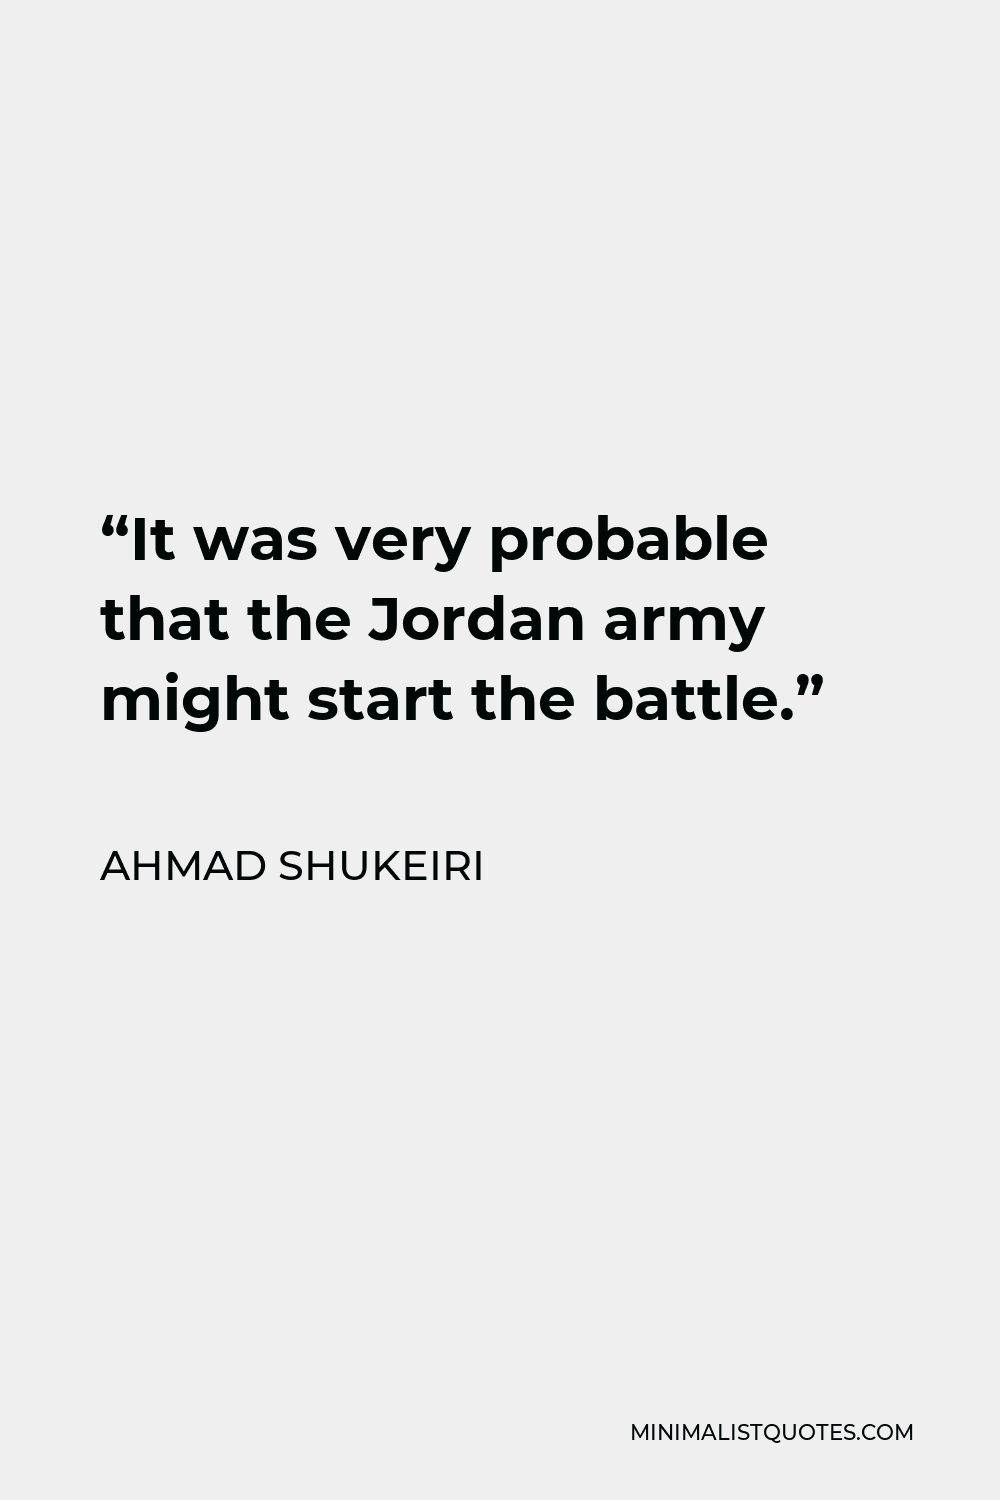 Ahmad Shukeiri Quote - “It was very probable that the Jordan army might start the battle.”